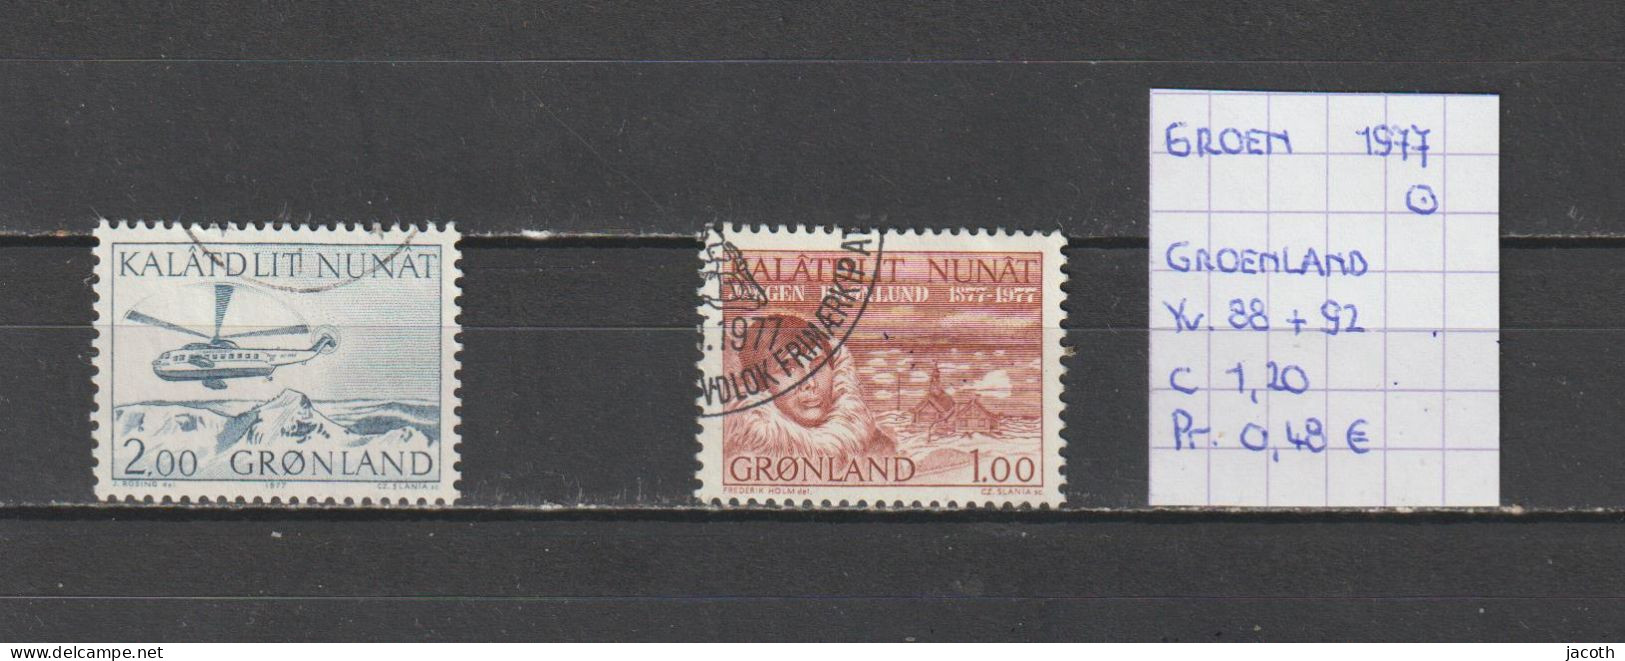 (TJ) Groenland 1977 - YT 88 + 92 (gest./obl./used) - Used Stamps